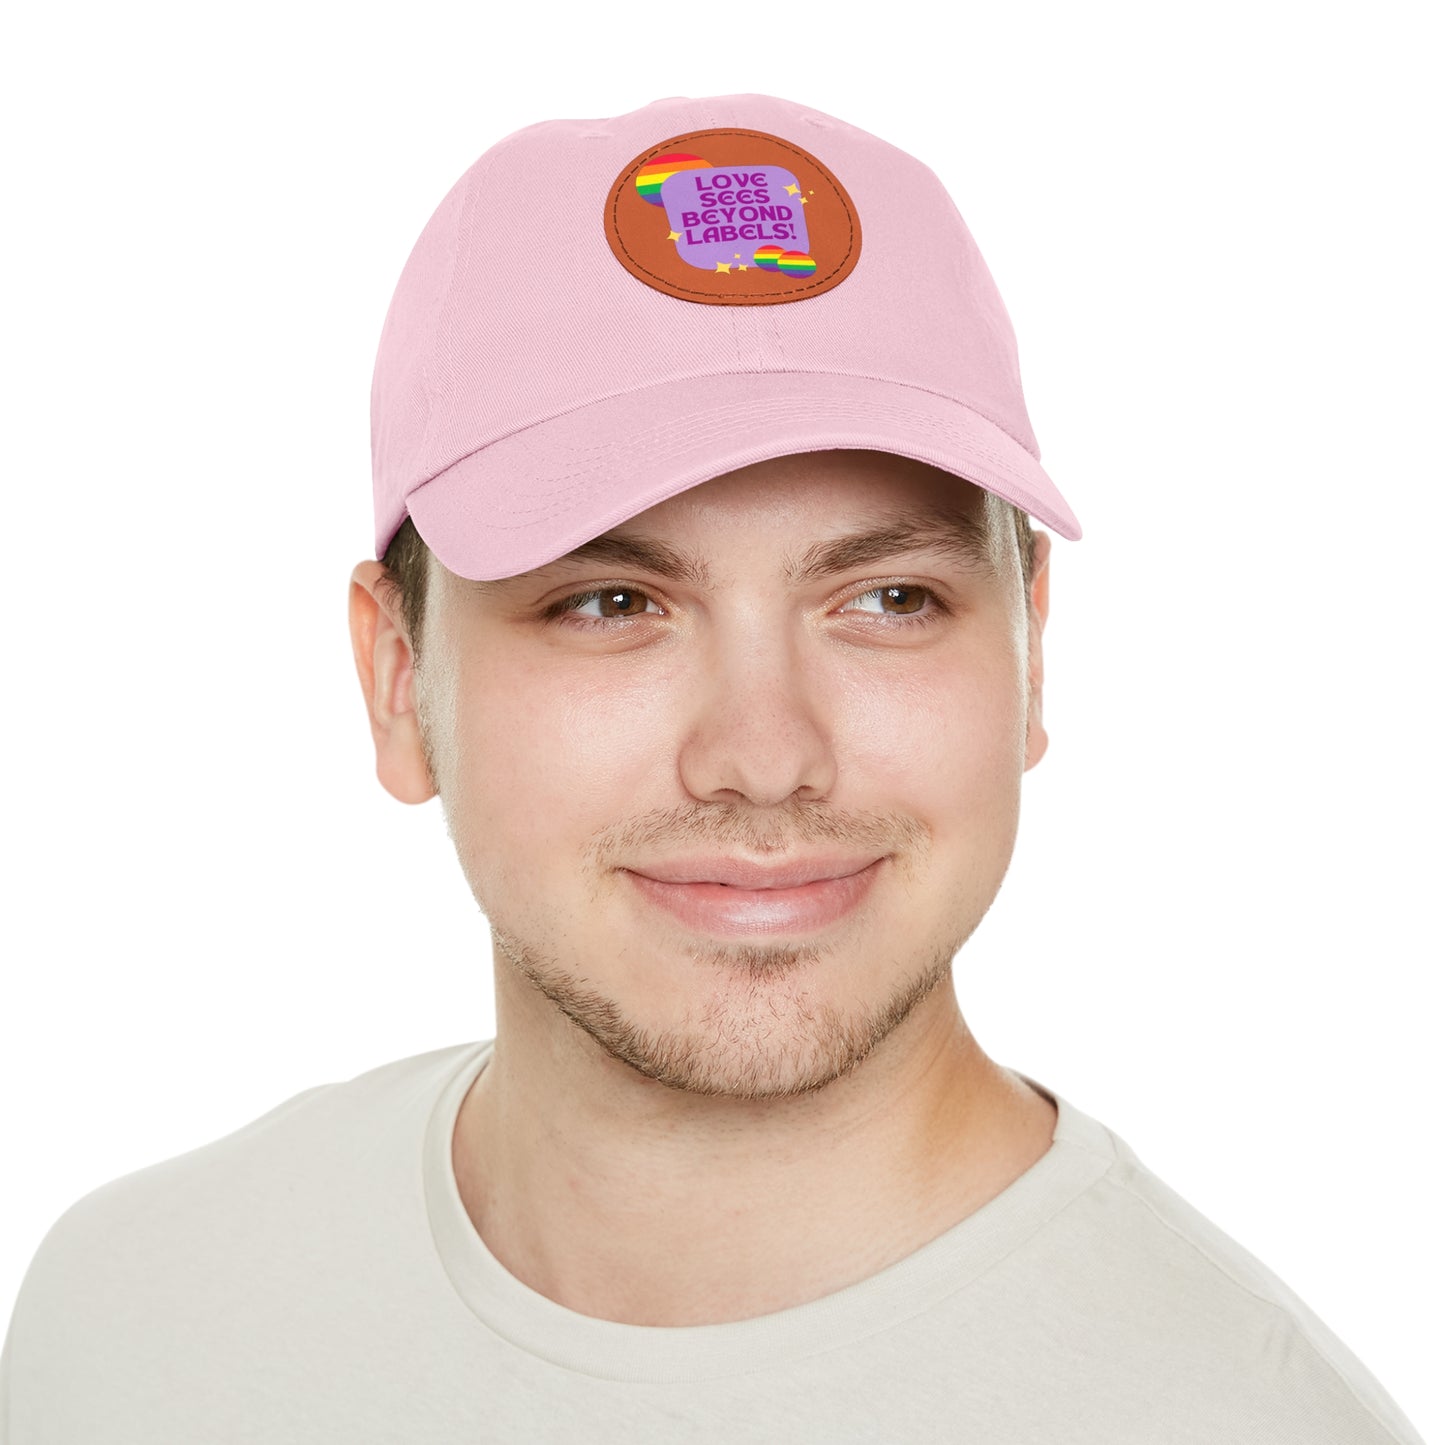 PRIDE LGBTQ Dad Hat with Leather Patch